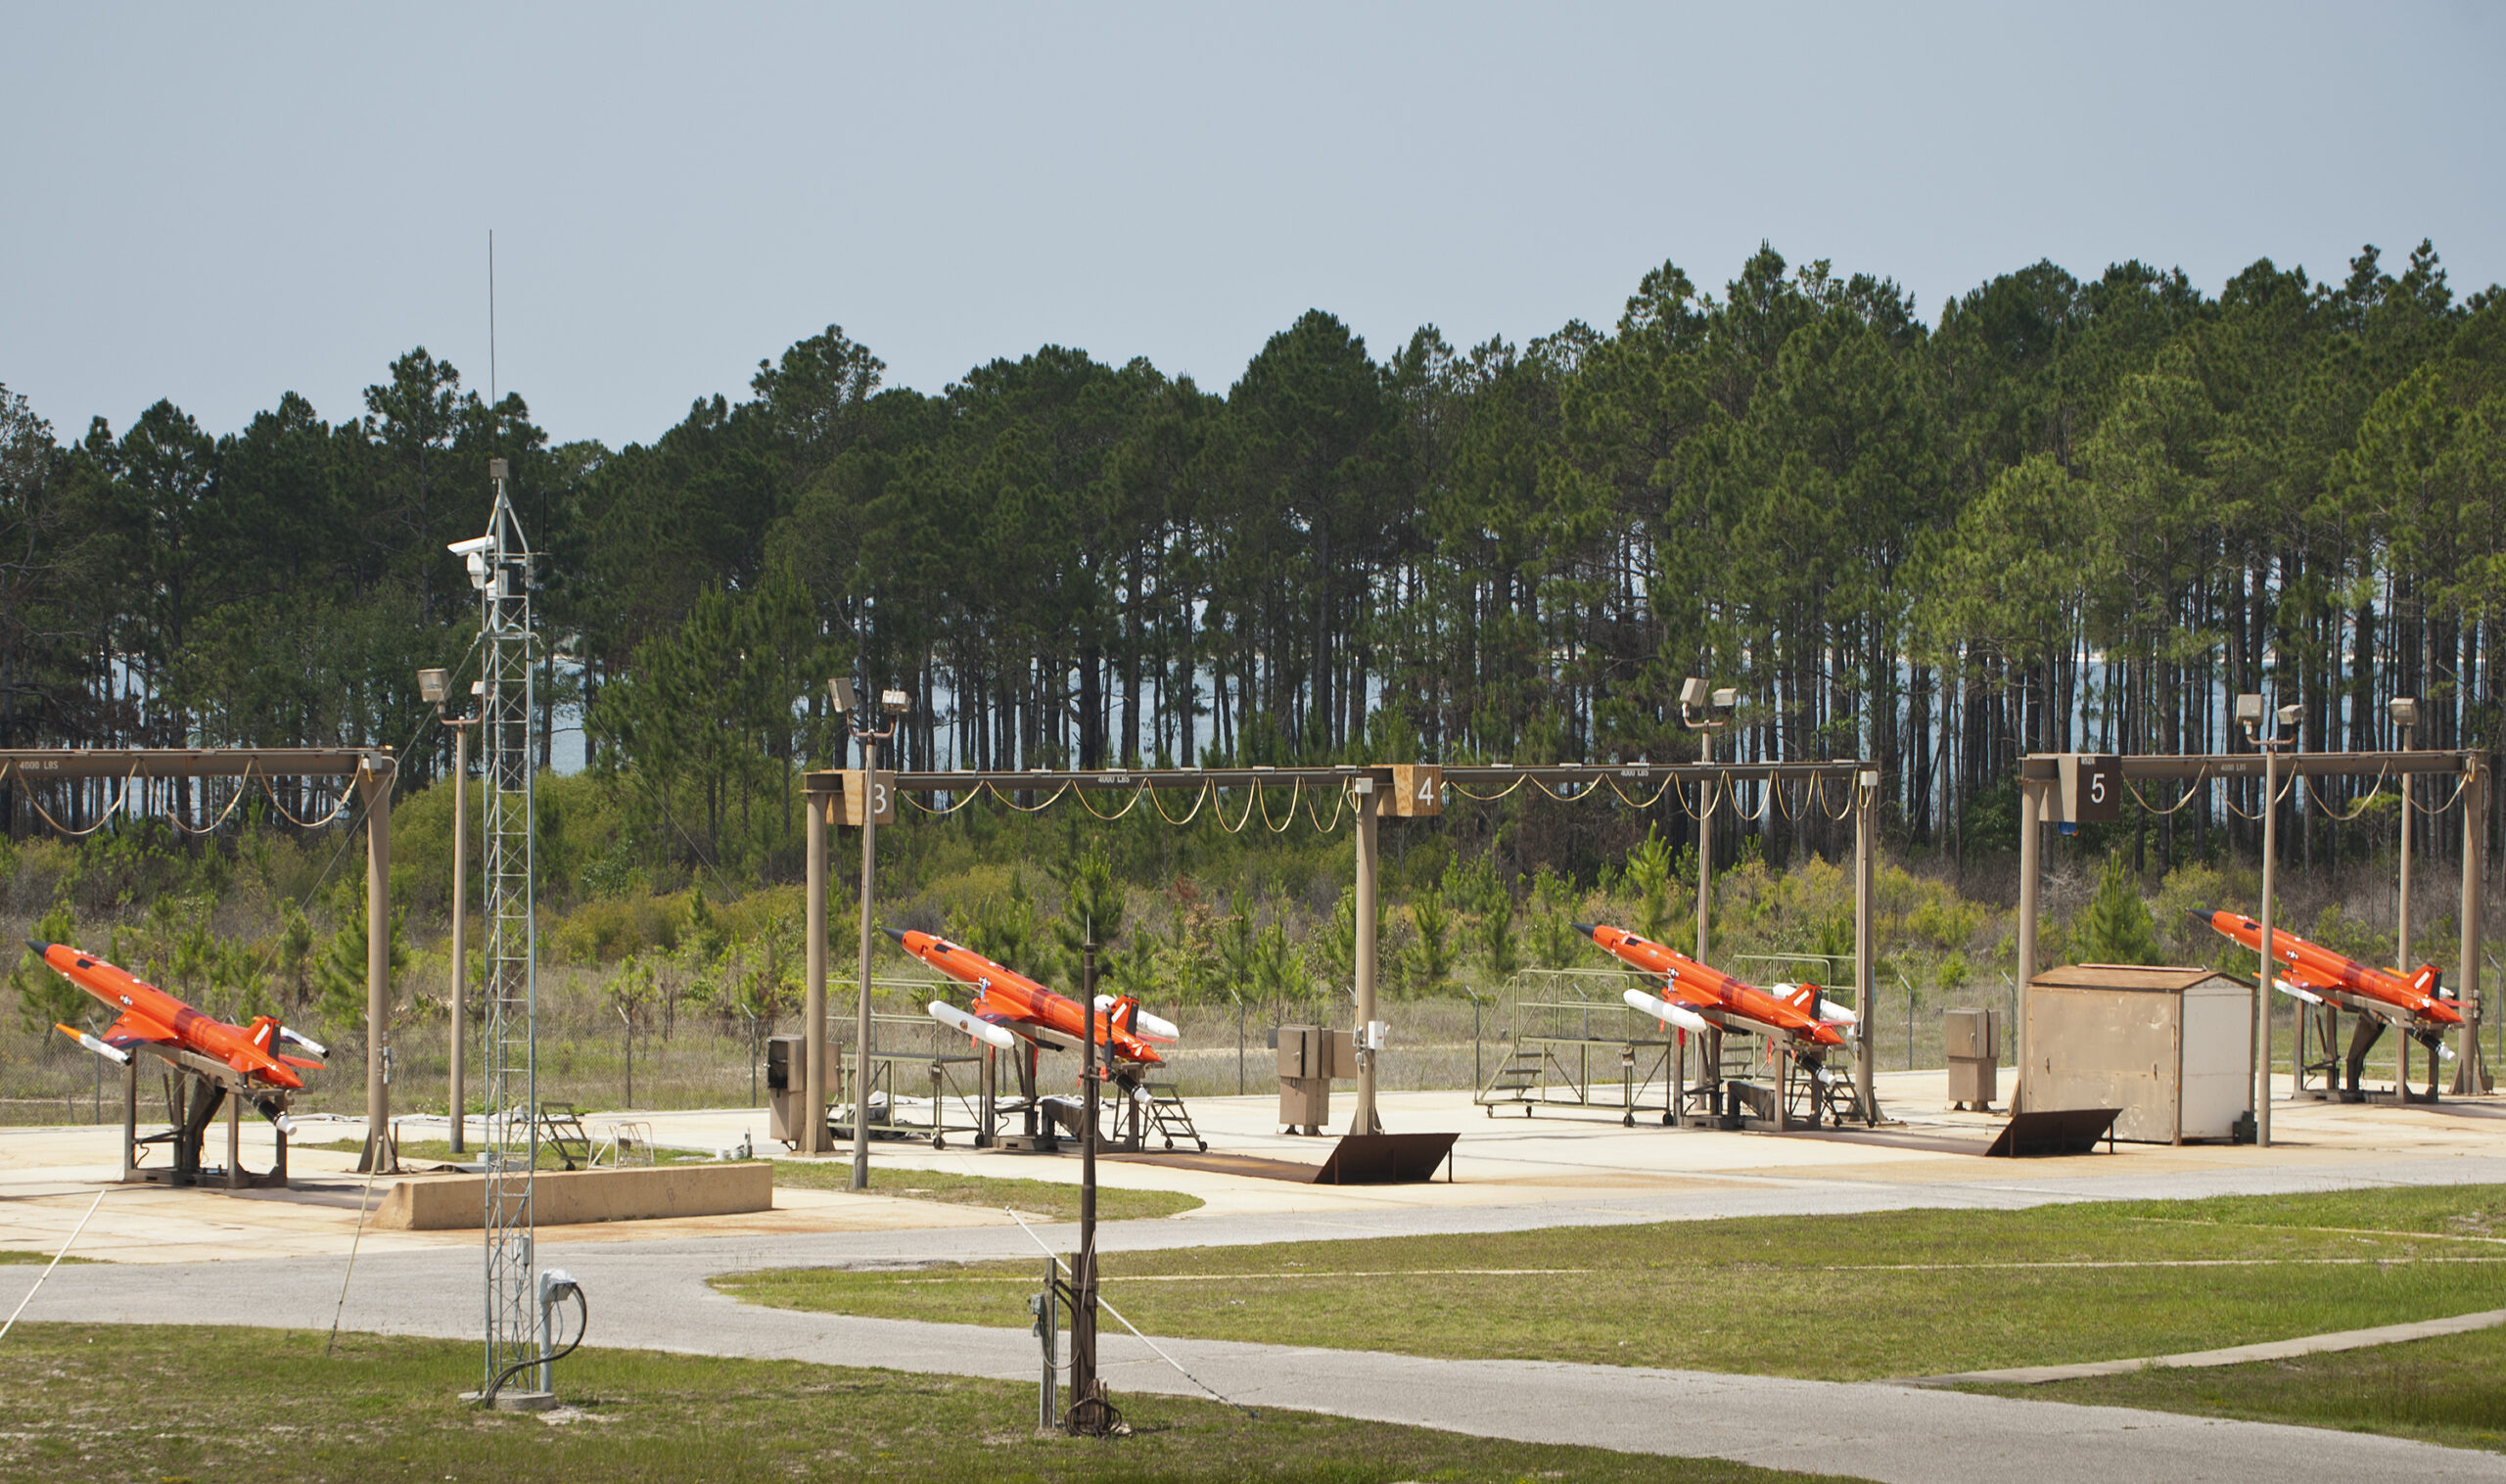 Four BQM-167s rest on their launch rails, positioned toward the Gulf of Mexico prior to launch May 12 at Tyndall Air Force Base, Fla. This subscale target is used for live weapon system evaluations and testing. The 82nd Aerial Targets Squadron operates QF-4, QF-16 and BQM-167 targets to provide manned and unmanned aerial targets support for programs across the Department of Defense. (U.S. Air Force photo/Sara Vidoni)